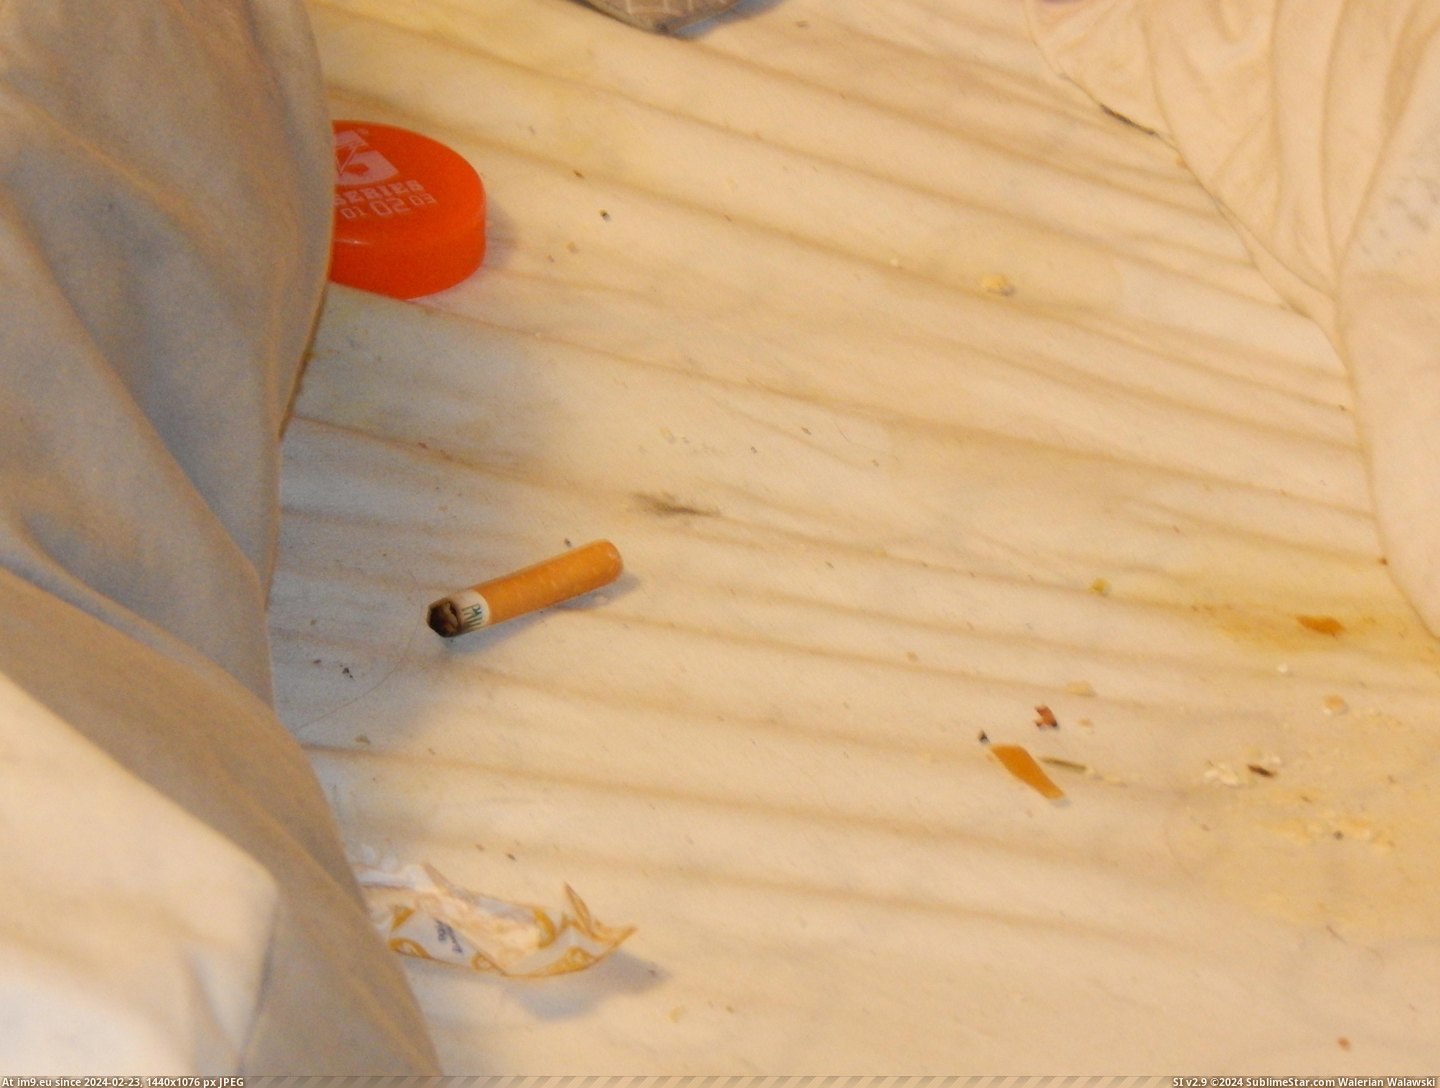 #Wtf #Was #Room #Checked #Worse #Cigs #Roommate #Smoking #Lying [Wtf] Roommate was lying about smoking cigs in her room, when we checked, what we found was definitely worse 5 Pic. (Image of album My r/WTF favs))